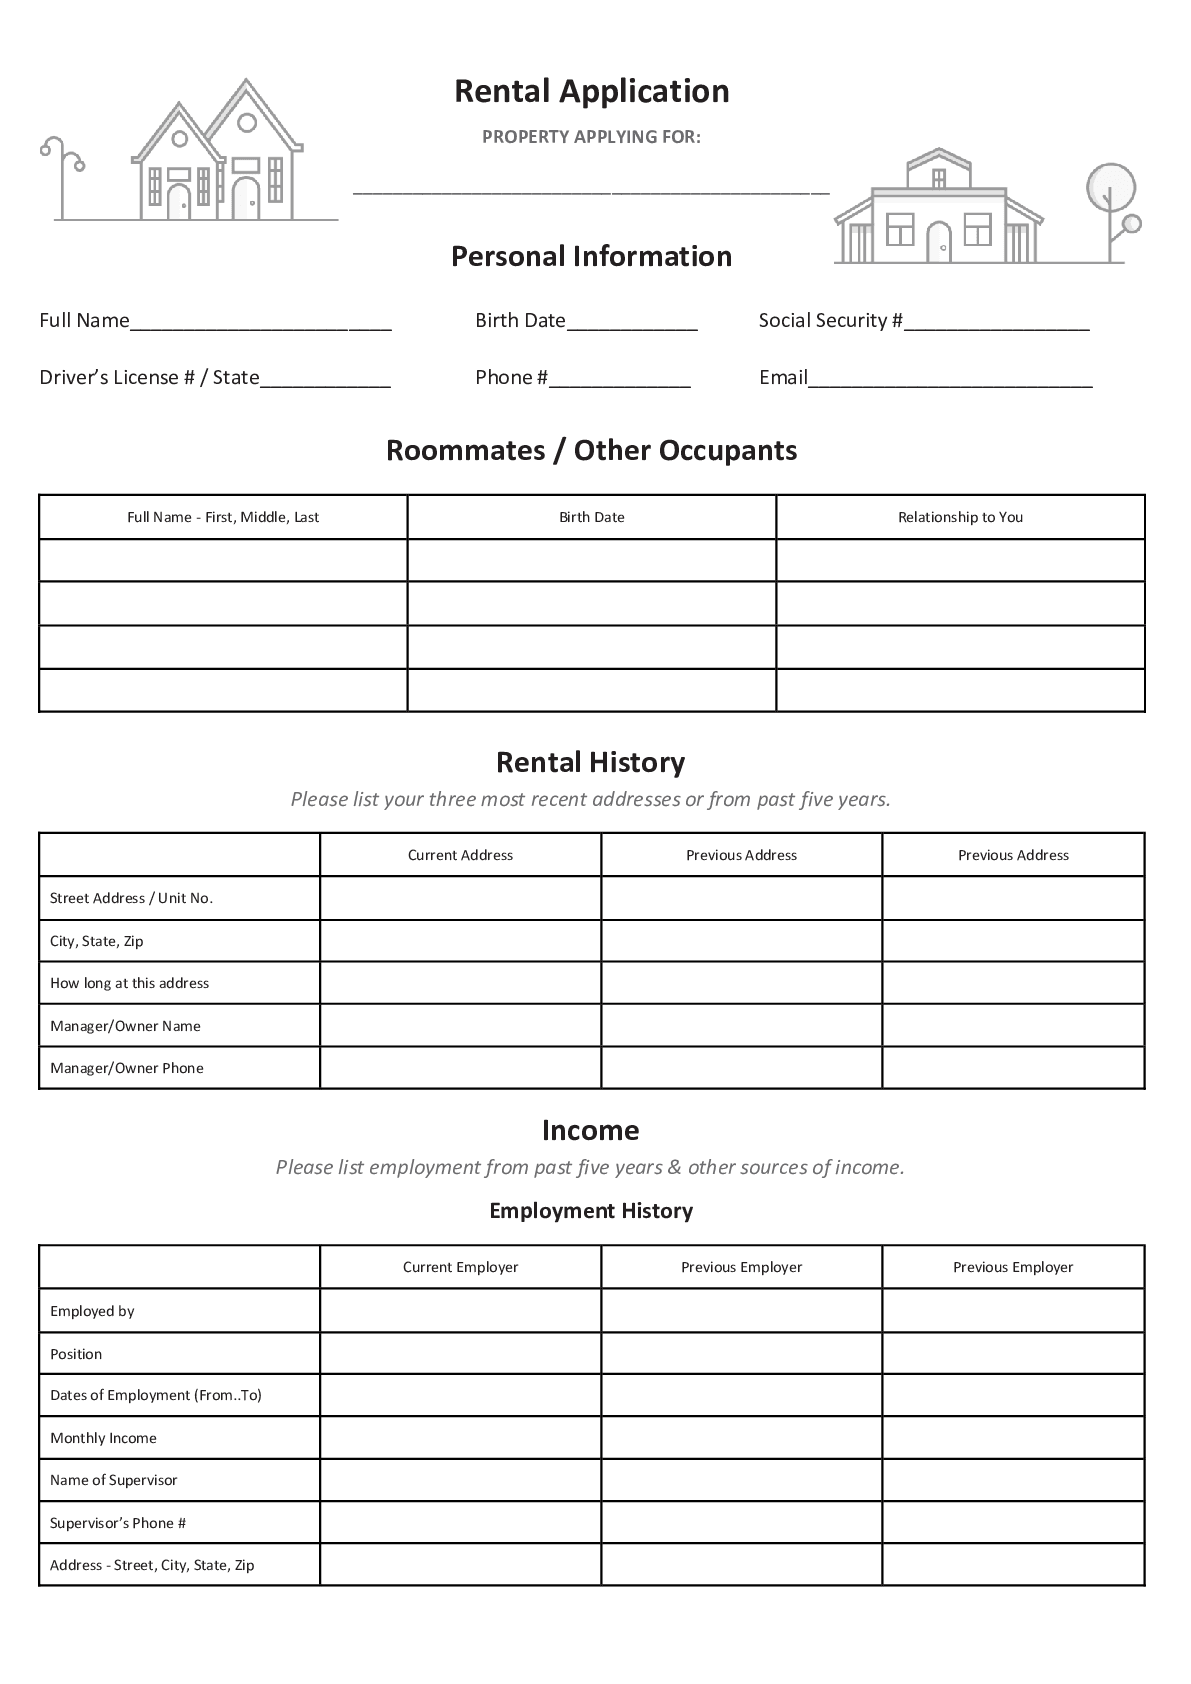 Simple Rental Application Form [2020] PDF, Word Template